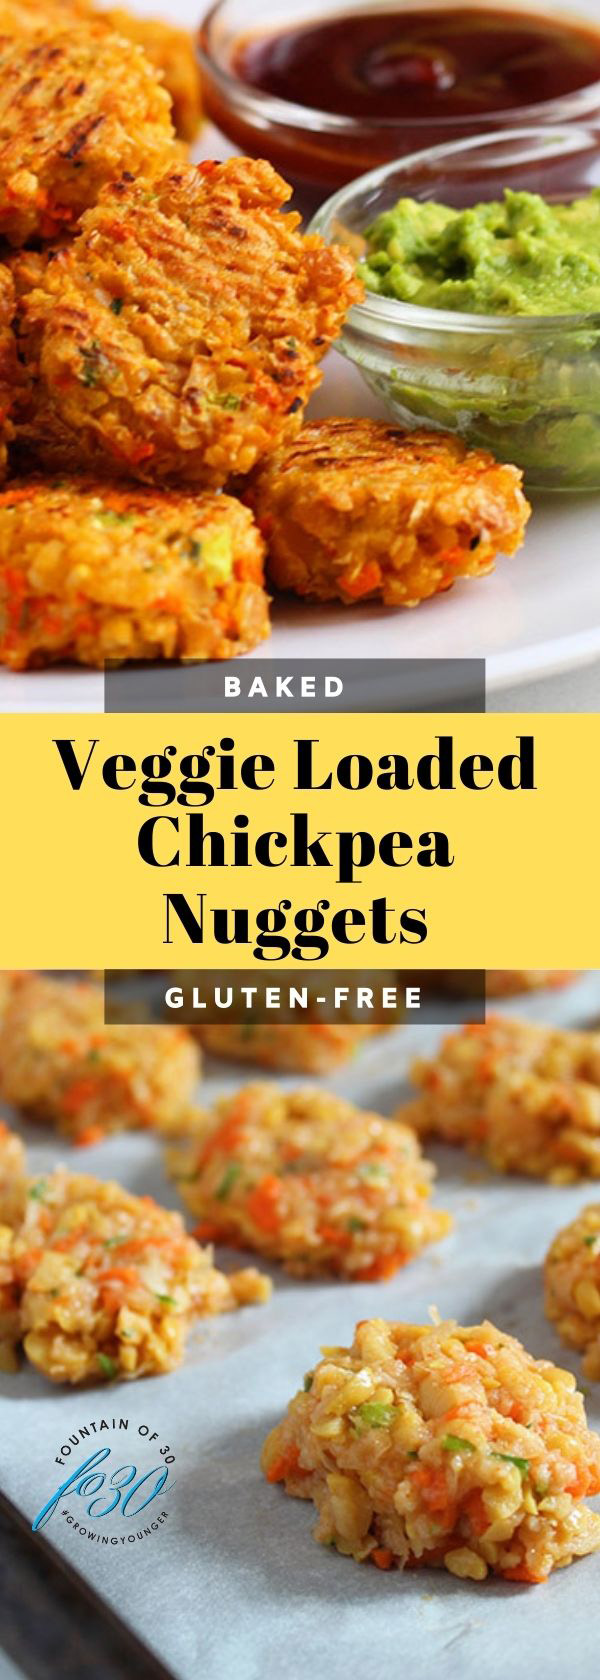 baked chickpea nuggets fountainof30